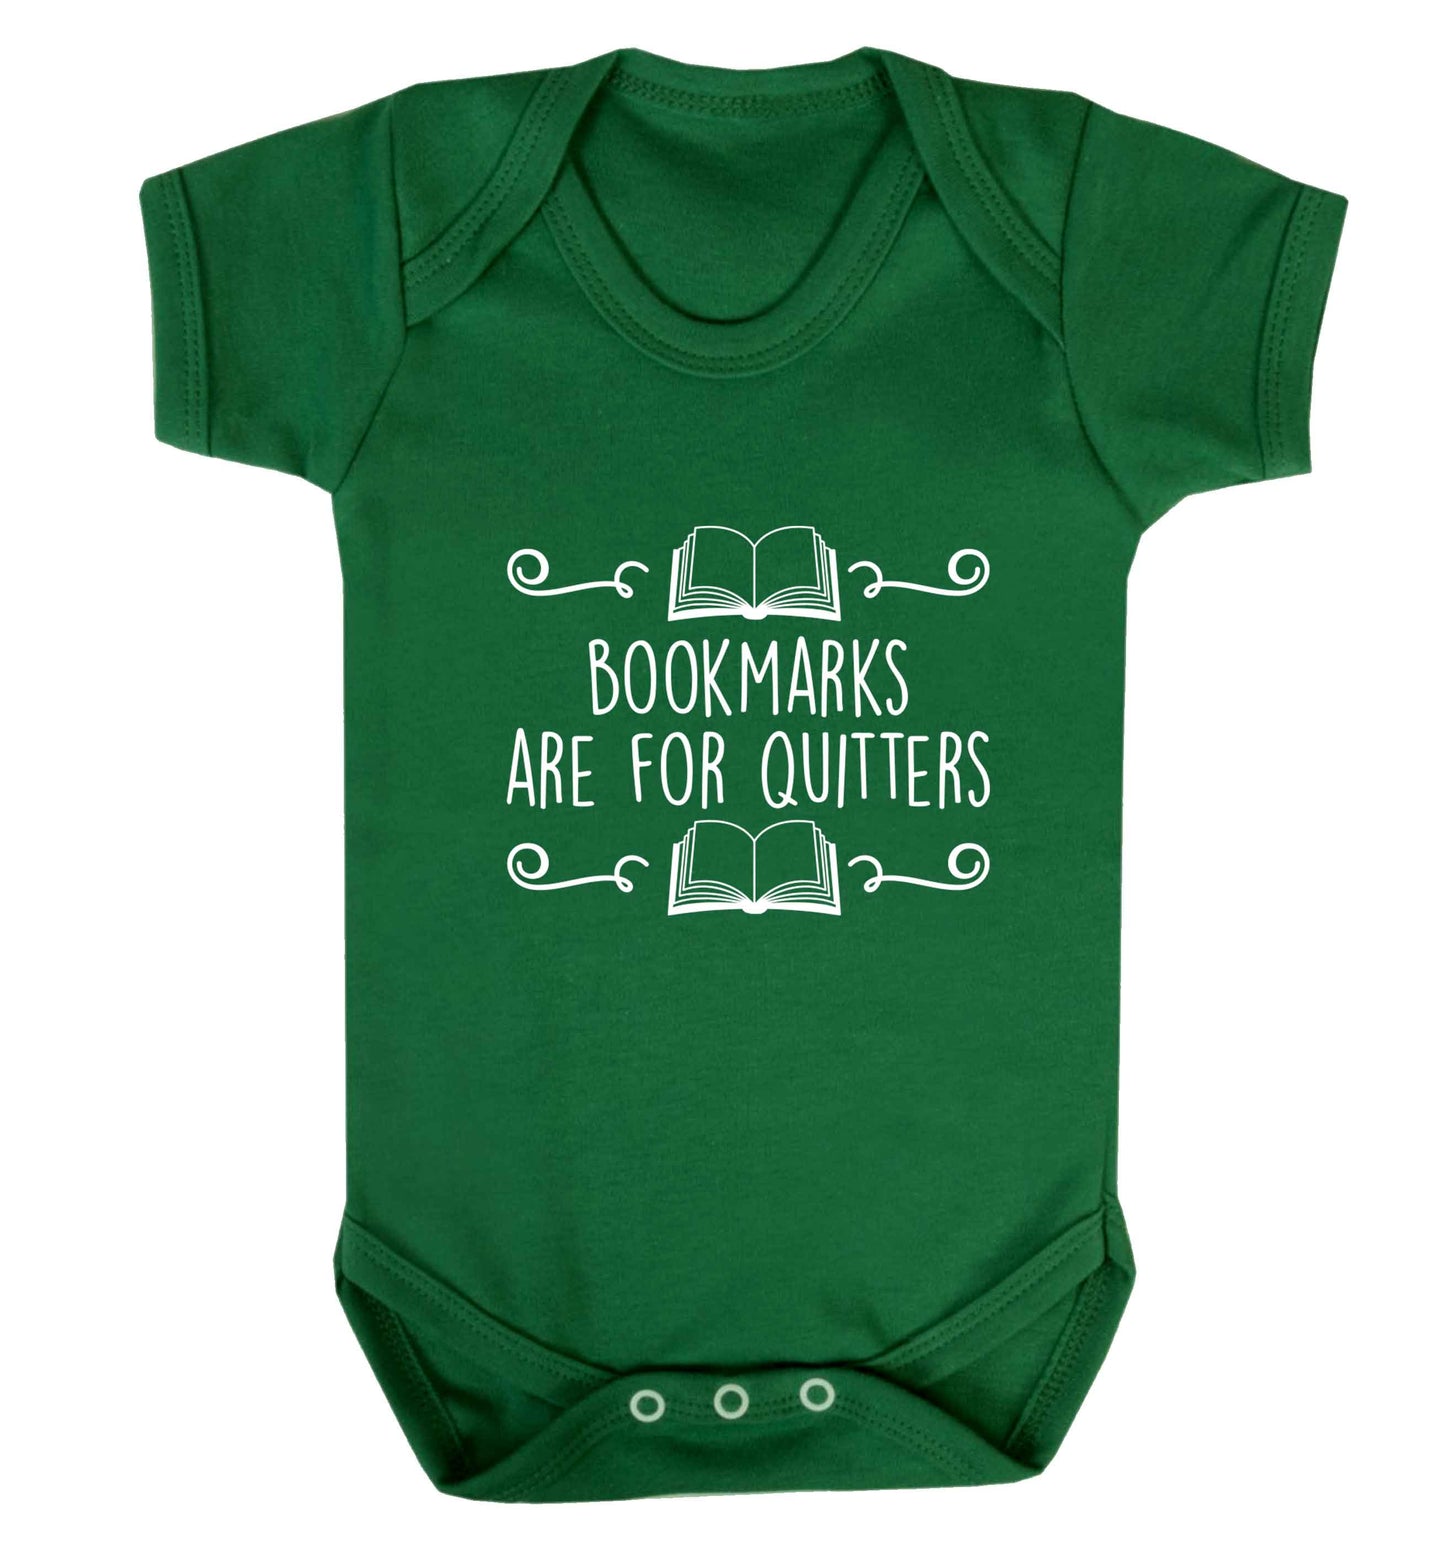 Bookmarks are for quitters baby vest green 18-24 months